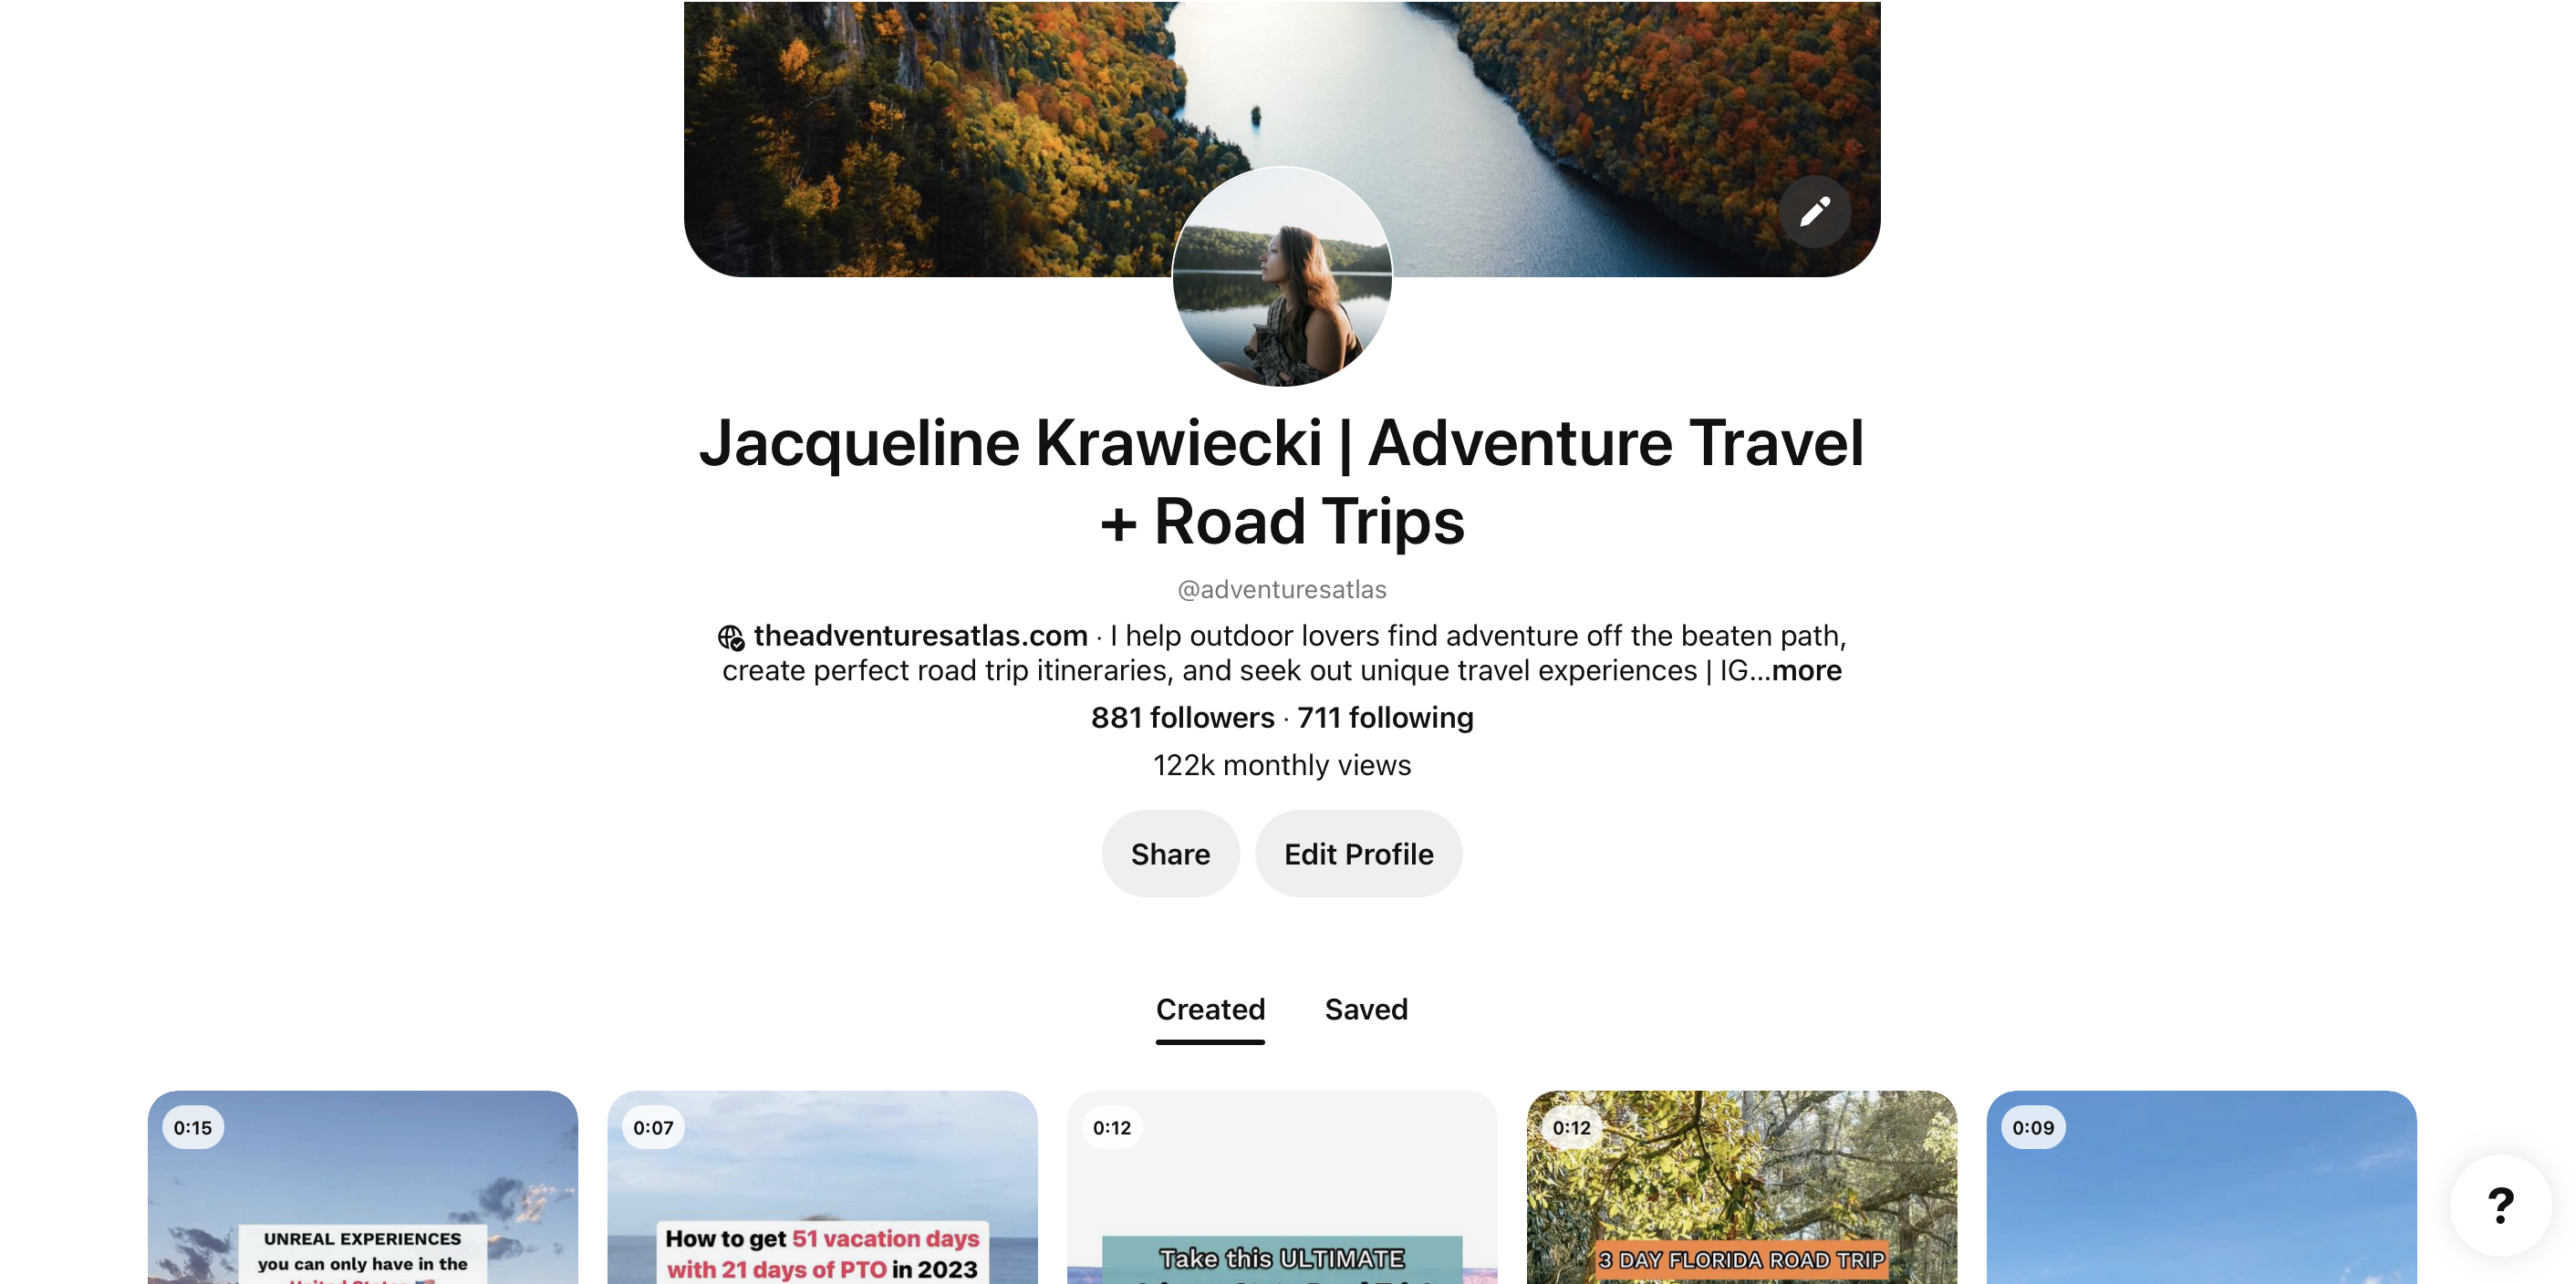 Pinterest is the best app for finding road trip inspiration